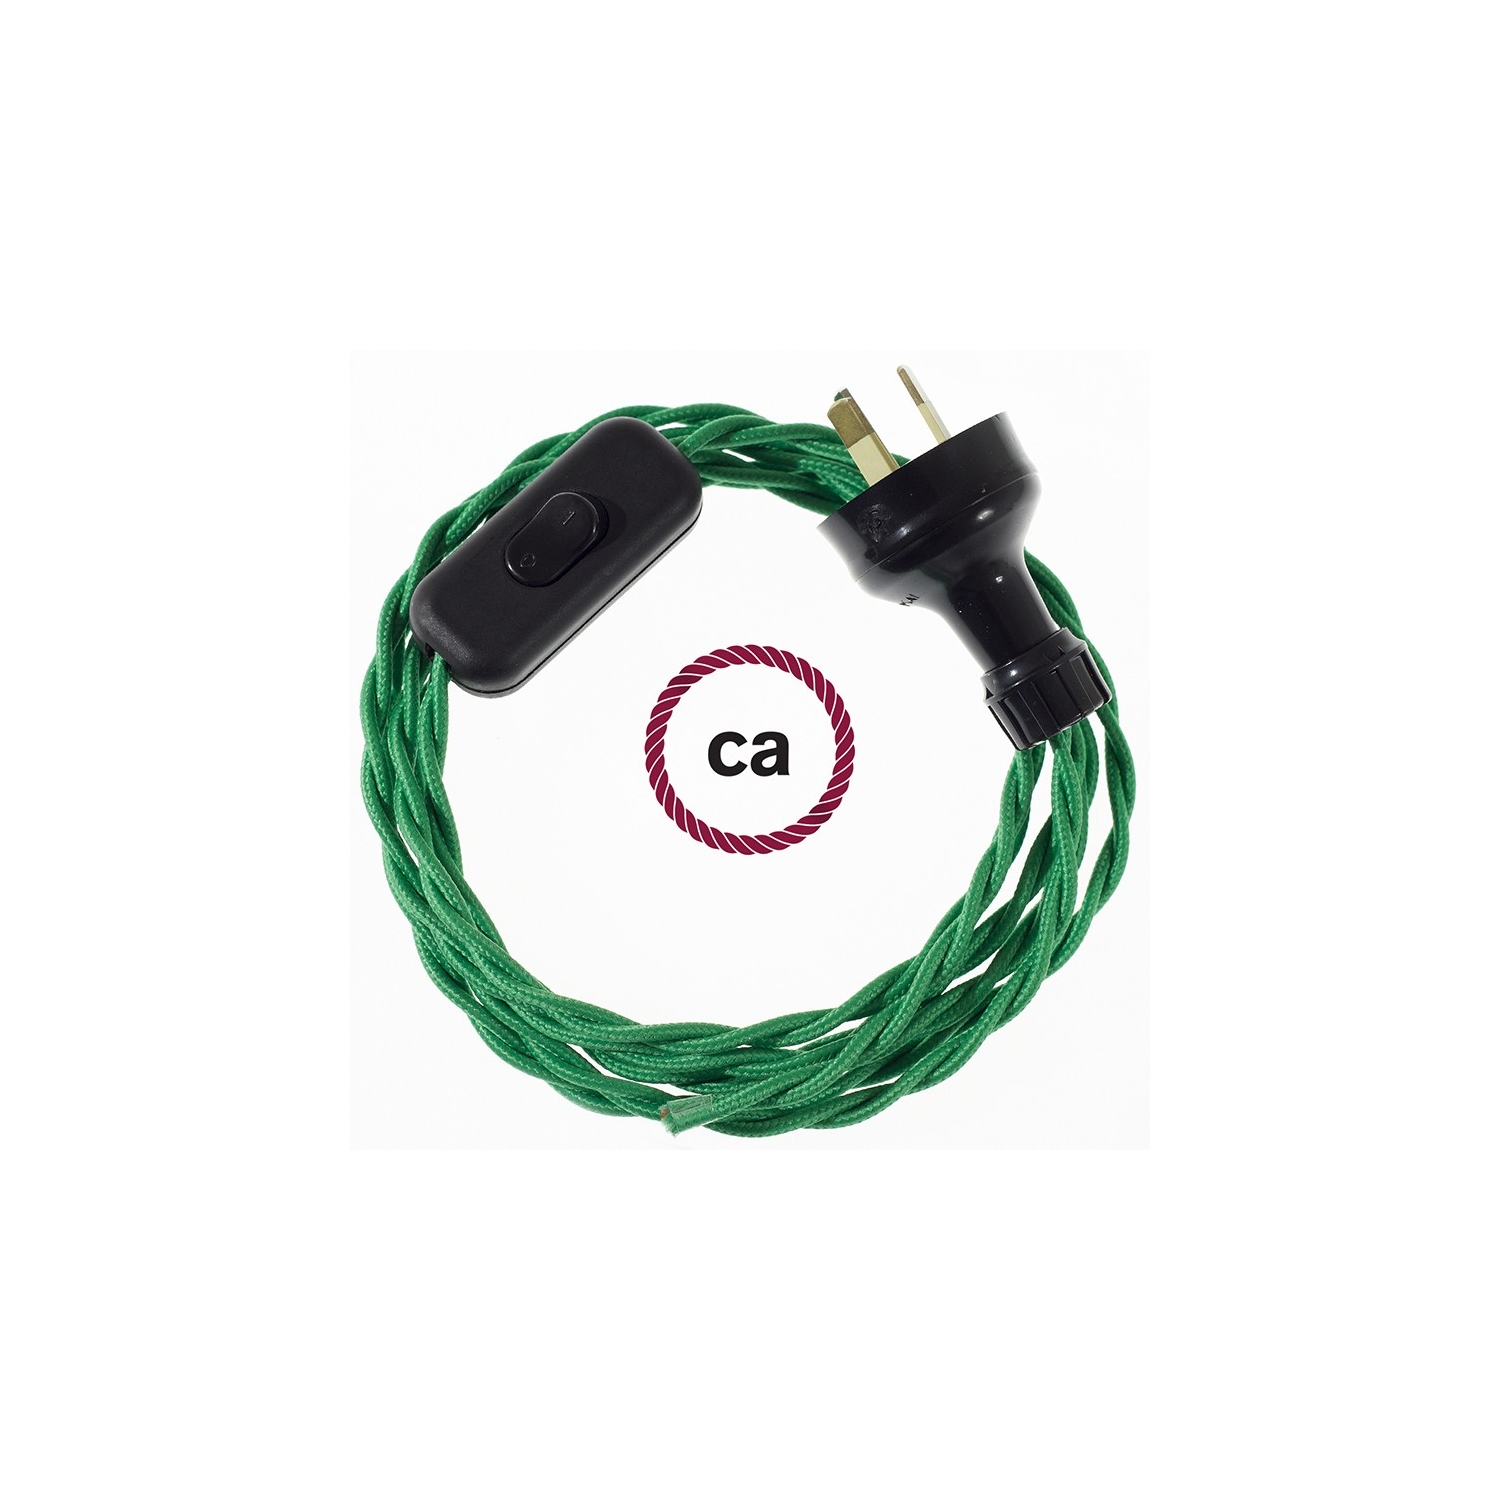 Wiring Green Rayon textile cable TM06 - 1.80 mt